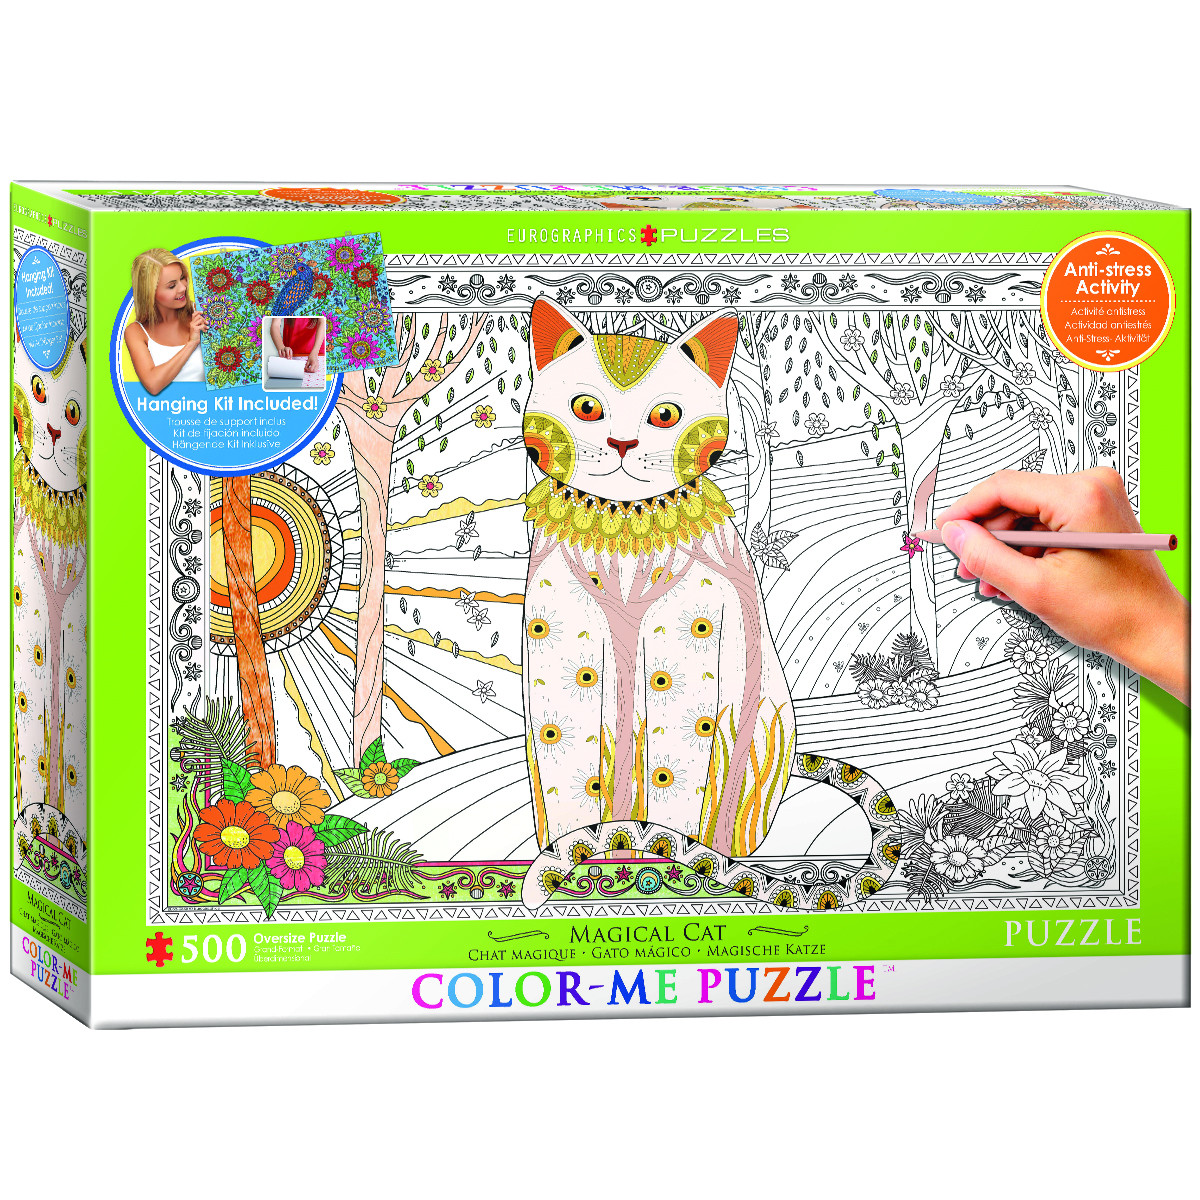 Spring Birdhouse Flower & Garden Jigsaw Puzzle By Cobble Hill